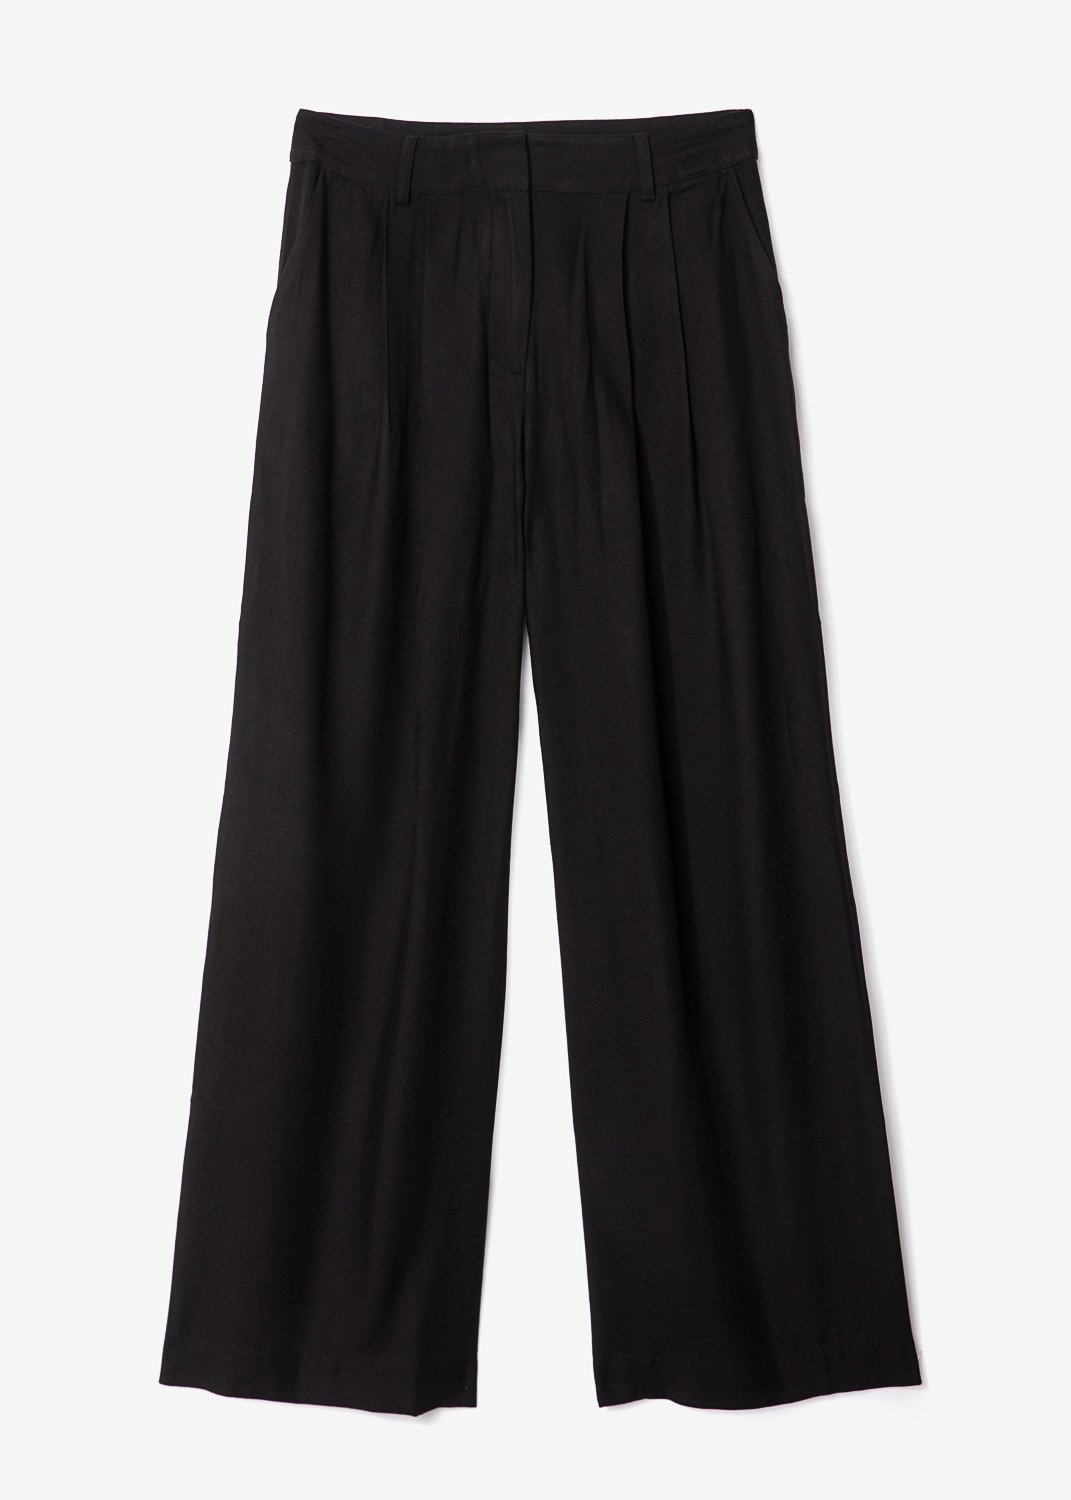 Black high waisted trousers